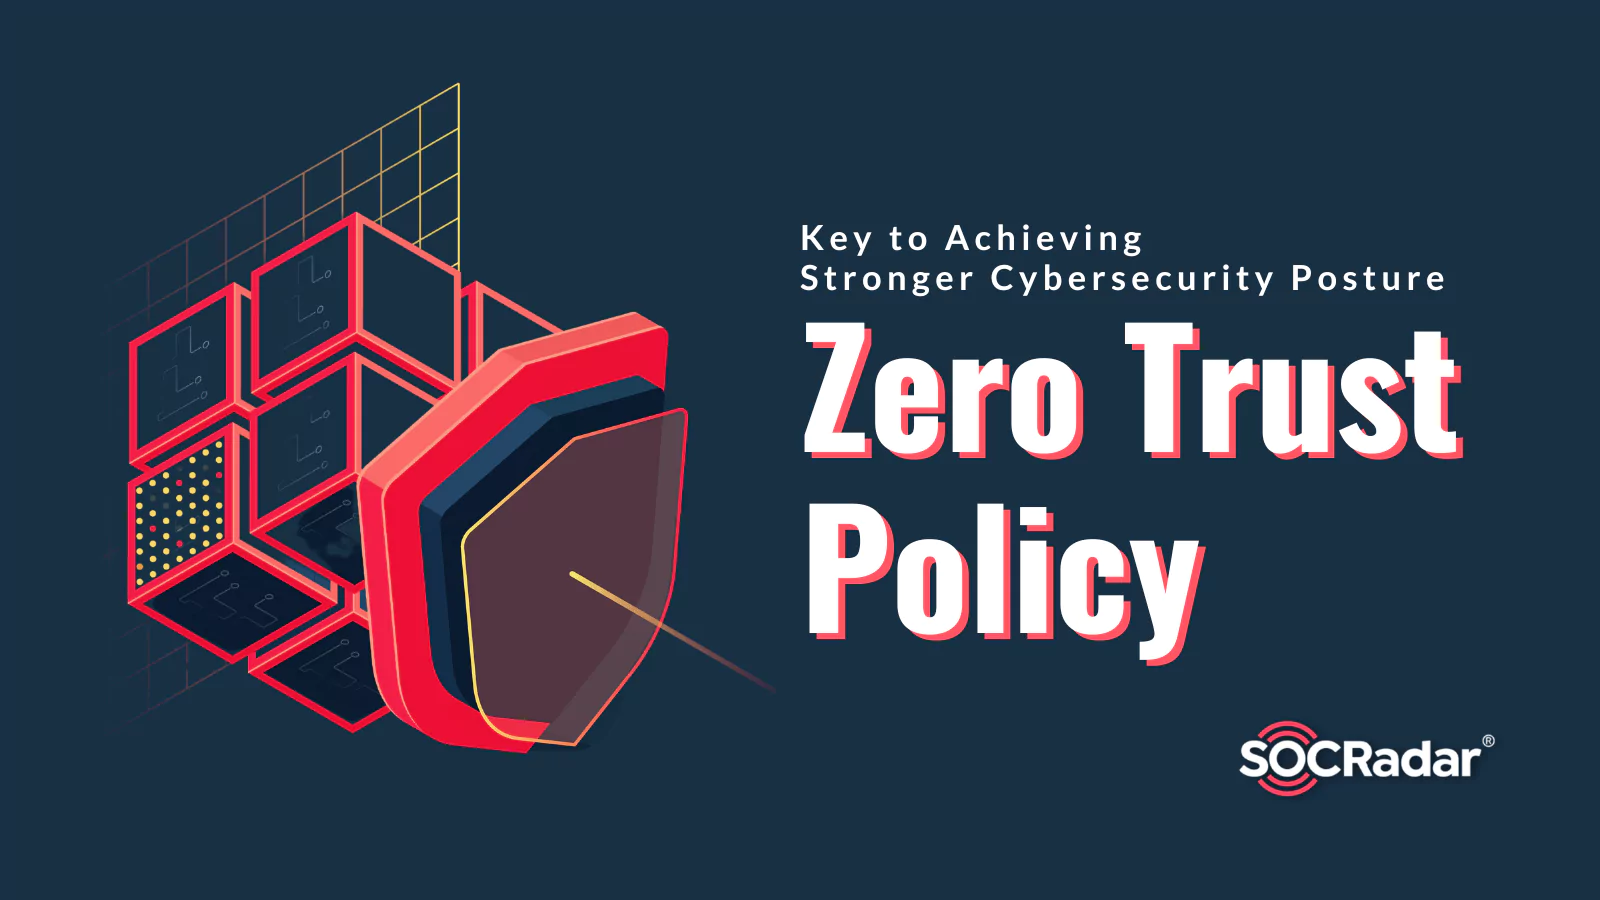 SOCRadar® Cyber Intelligence Inc. | Key to Achieving a Stronger Cybersecurity Posture: Zero Trust Policy